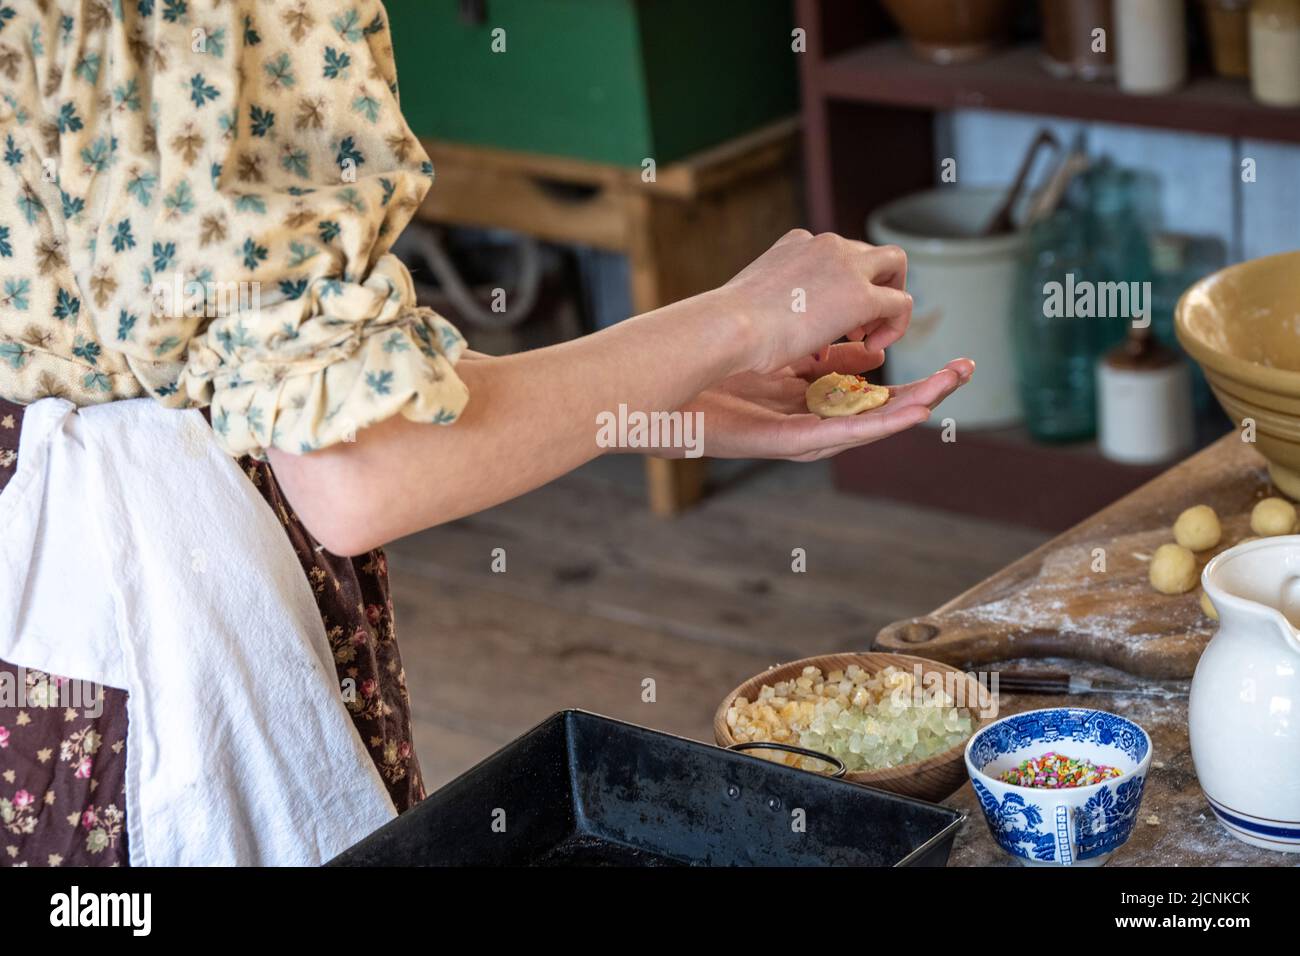 making cookies with candy fruit as a topping at the historic Fort Nisqually Living Museum in Tacoma, Washington Stock Photo